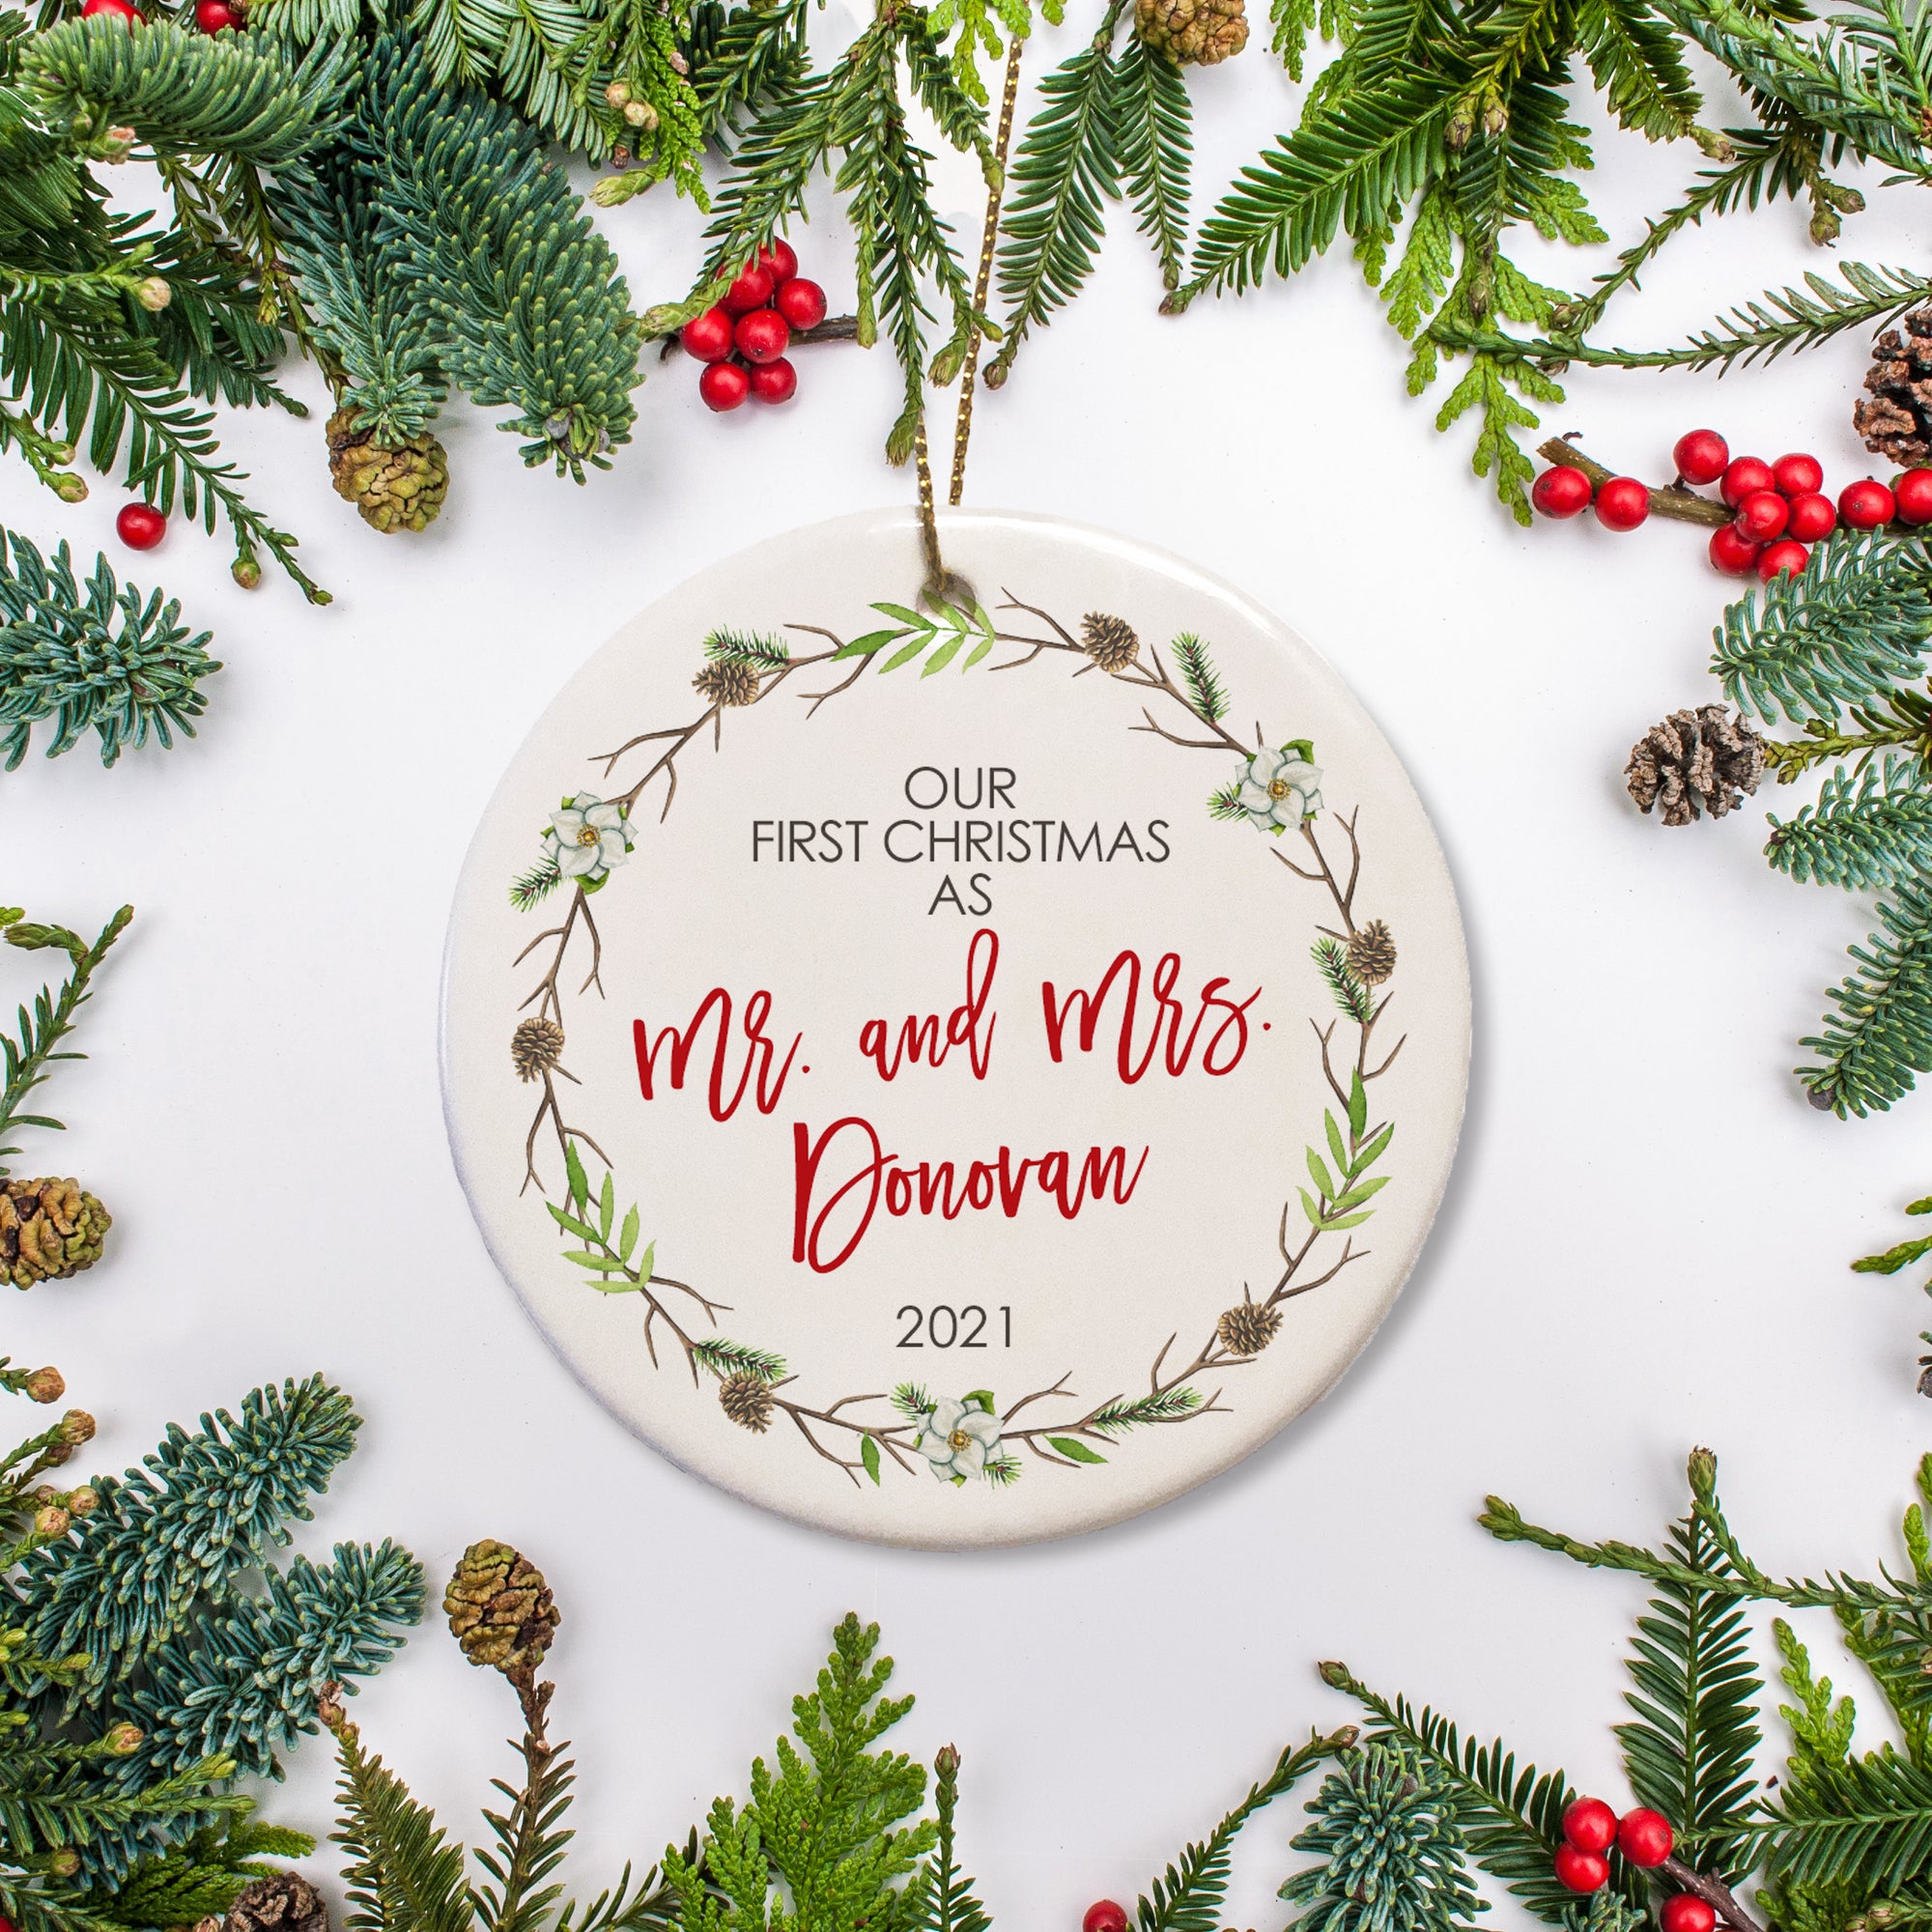 Mr & Mrs Just Married Christmas personalized Ornament | Pipsy.com Edit alt text